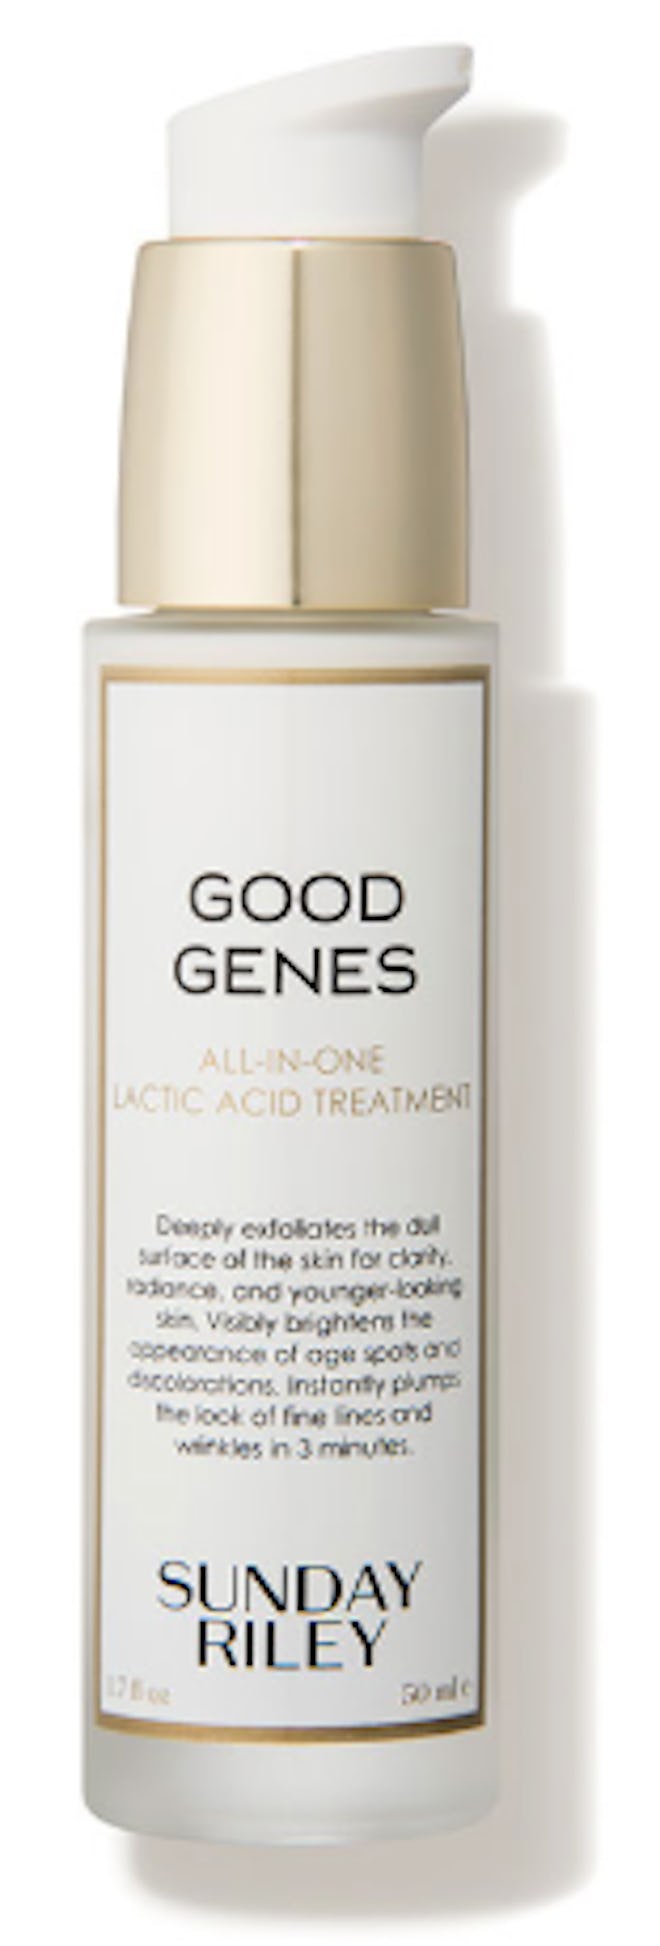 Good Genes All-In-One Lactic Acid Treatment 